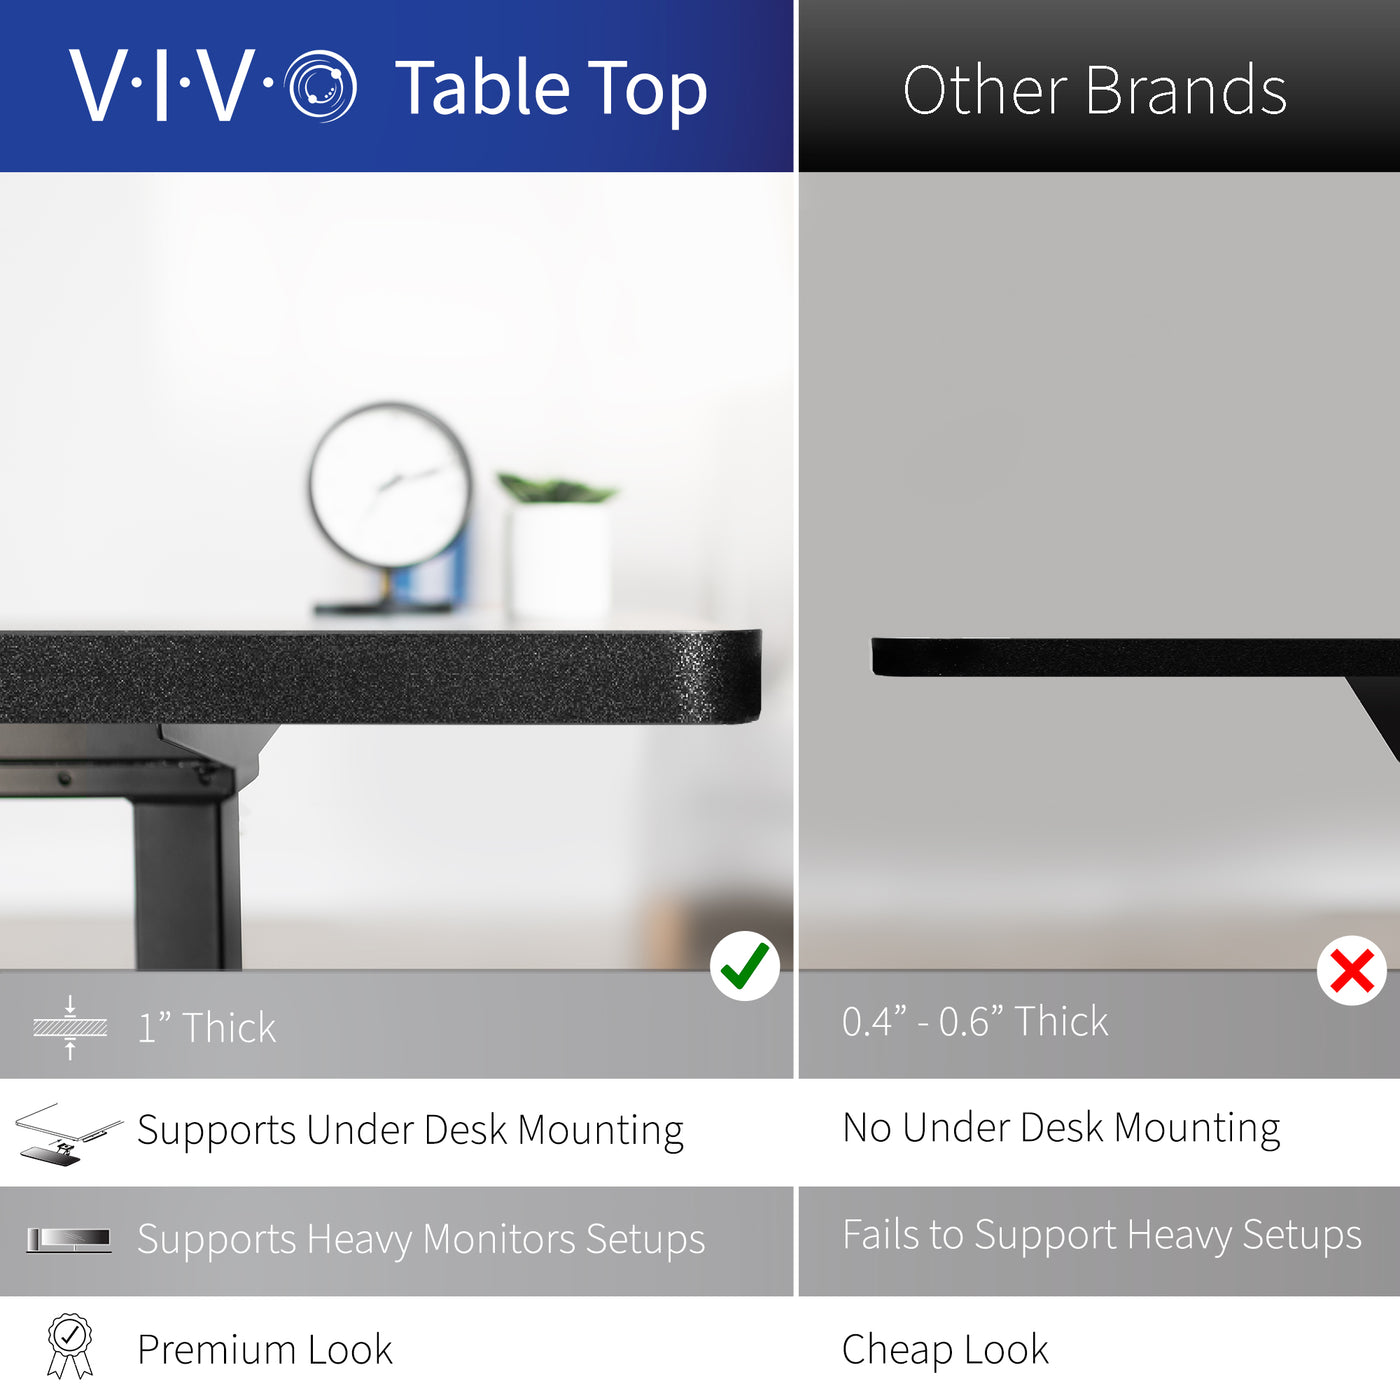 Premium VIVO table tops compared to thinner table tops on the market.